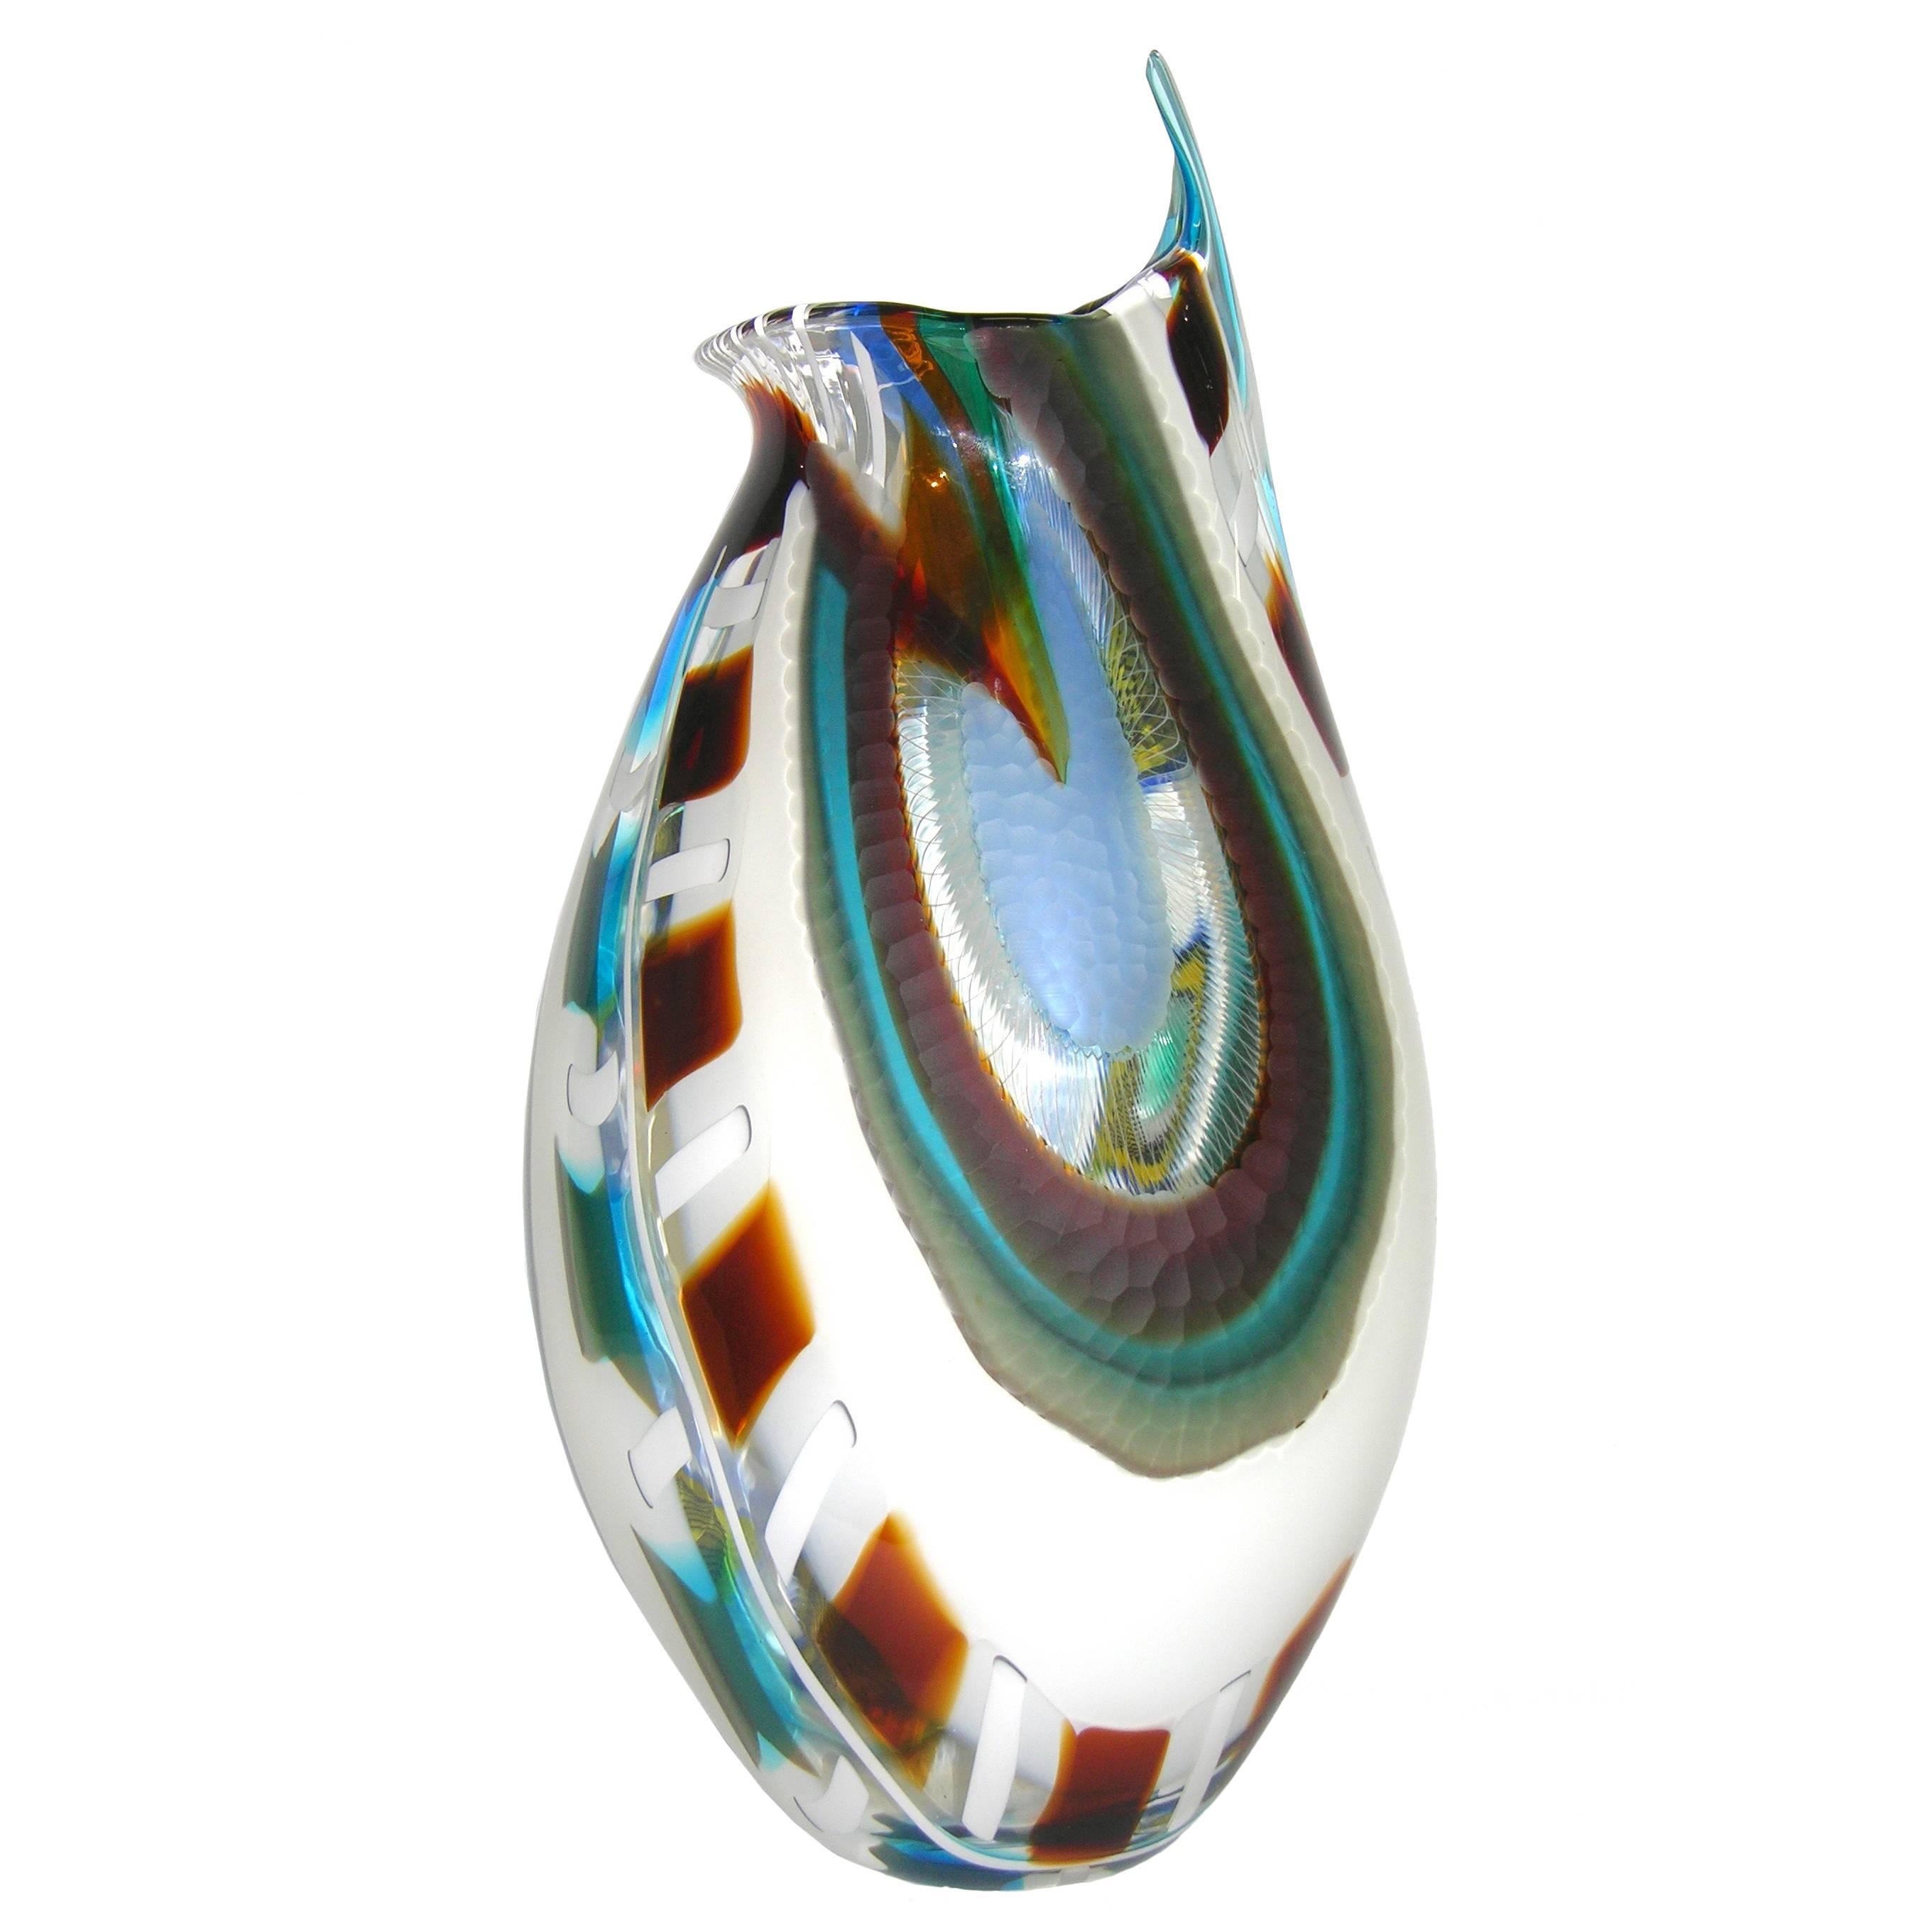 1990 Afro Celotto Modern Art Glass Bowl with Murrine Exclusive for Seguso